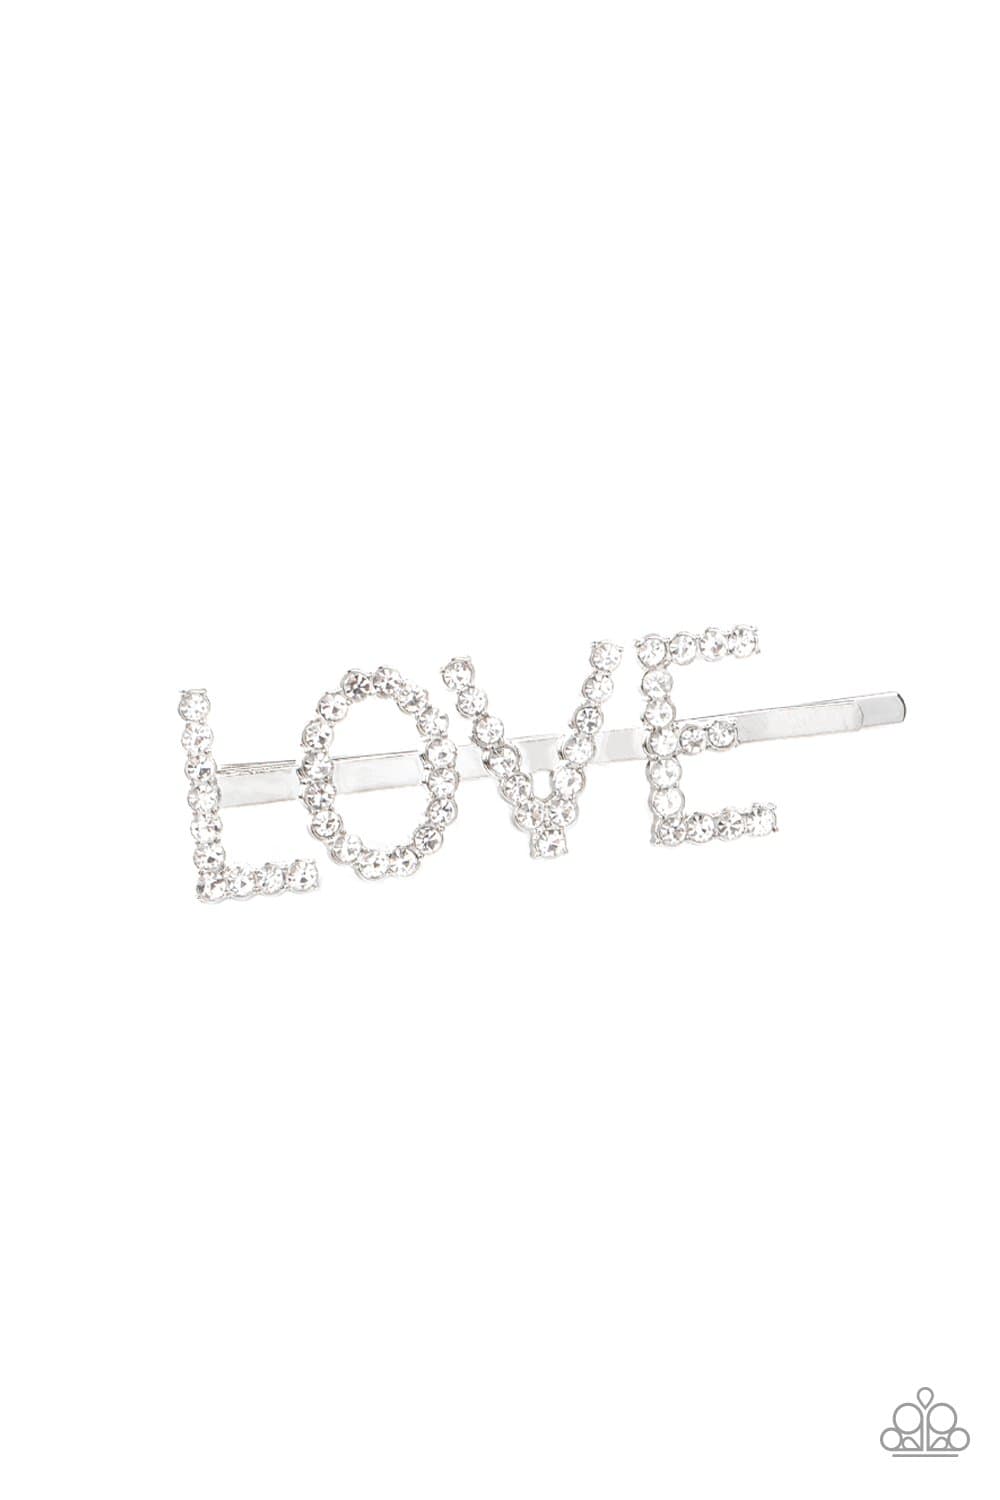 Paparazzi: All You Need Is Love - White Bobby Pin - Jewels N’ Thingz Boutique